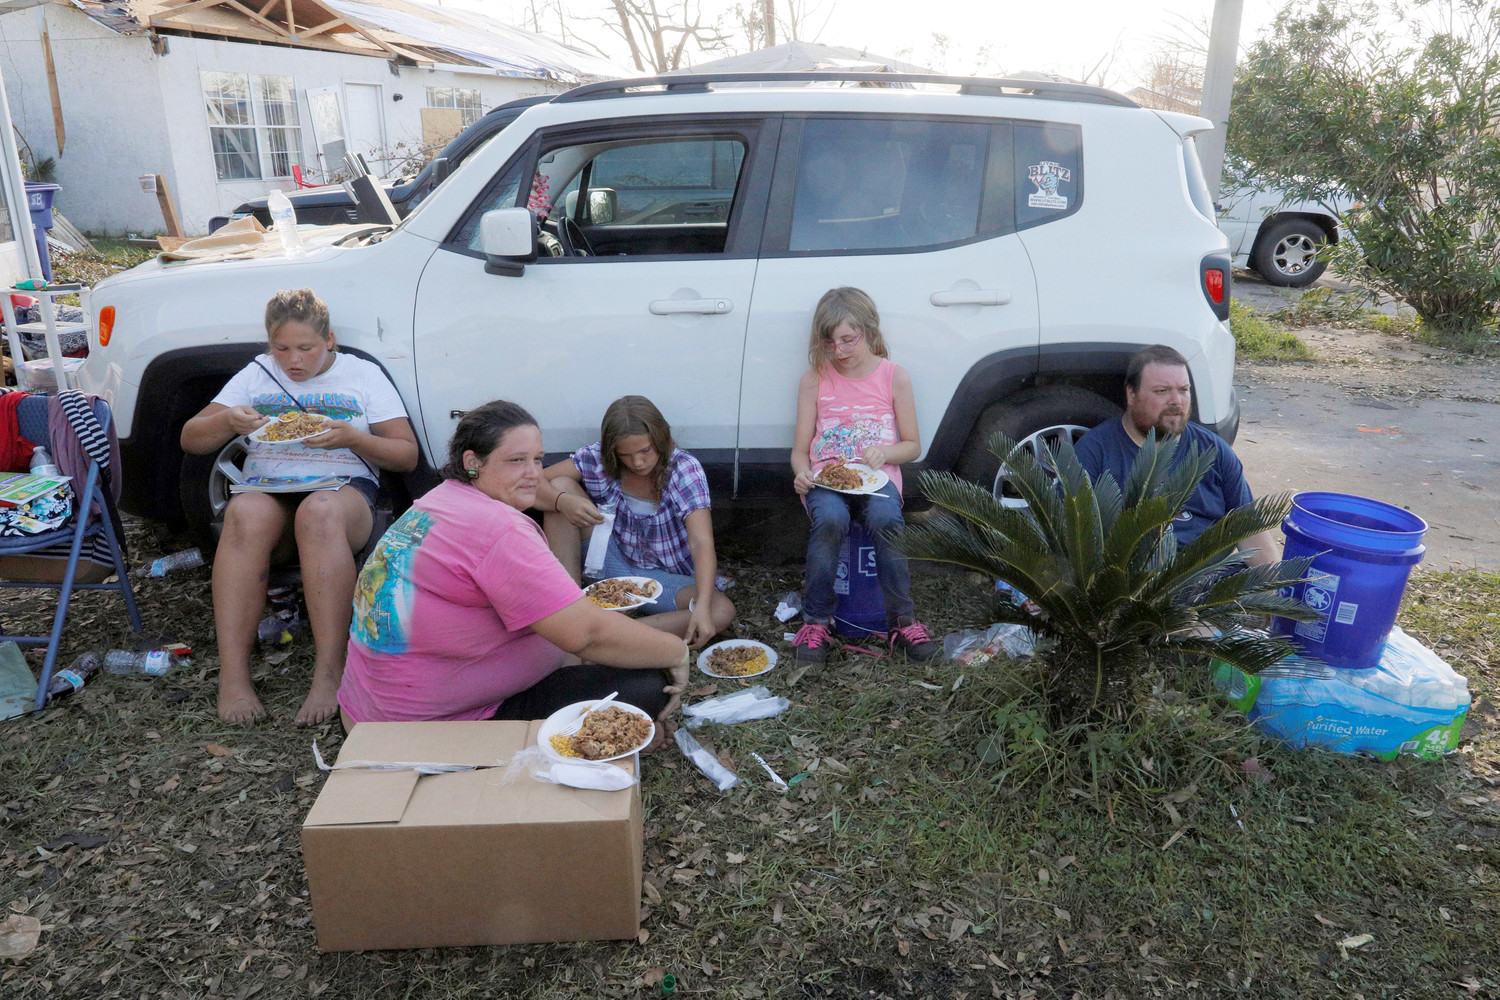 The Lachance family eats a hot meal prepared by Operation BBQ Relief and distributed by members of 50 Star Search and Rescue outside their damaged home Oct. 16 in the aftermath of Hurricane Michael in Panama City, Fla. The hurricane killed at least 16 people in Florida, most of them in the coastal county that took a direct hit from the storm, state emergency authorities said. That’s in addition to at least 10 deaths elsewhere across the South.